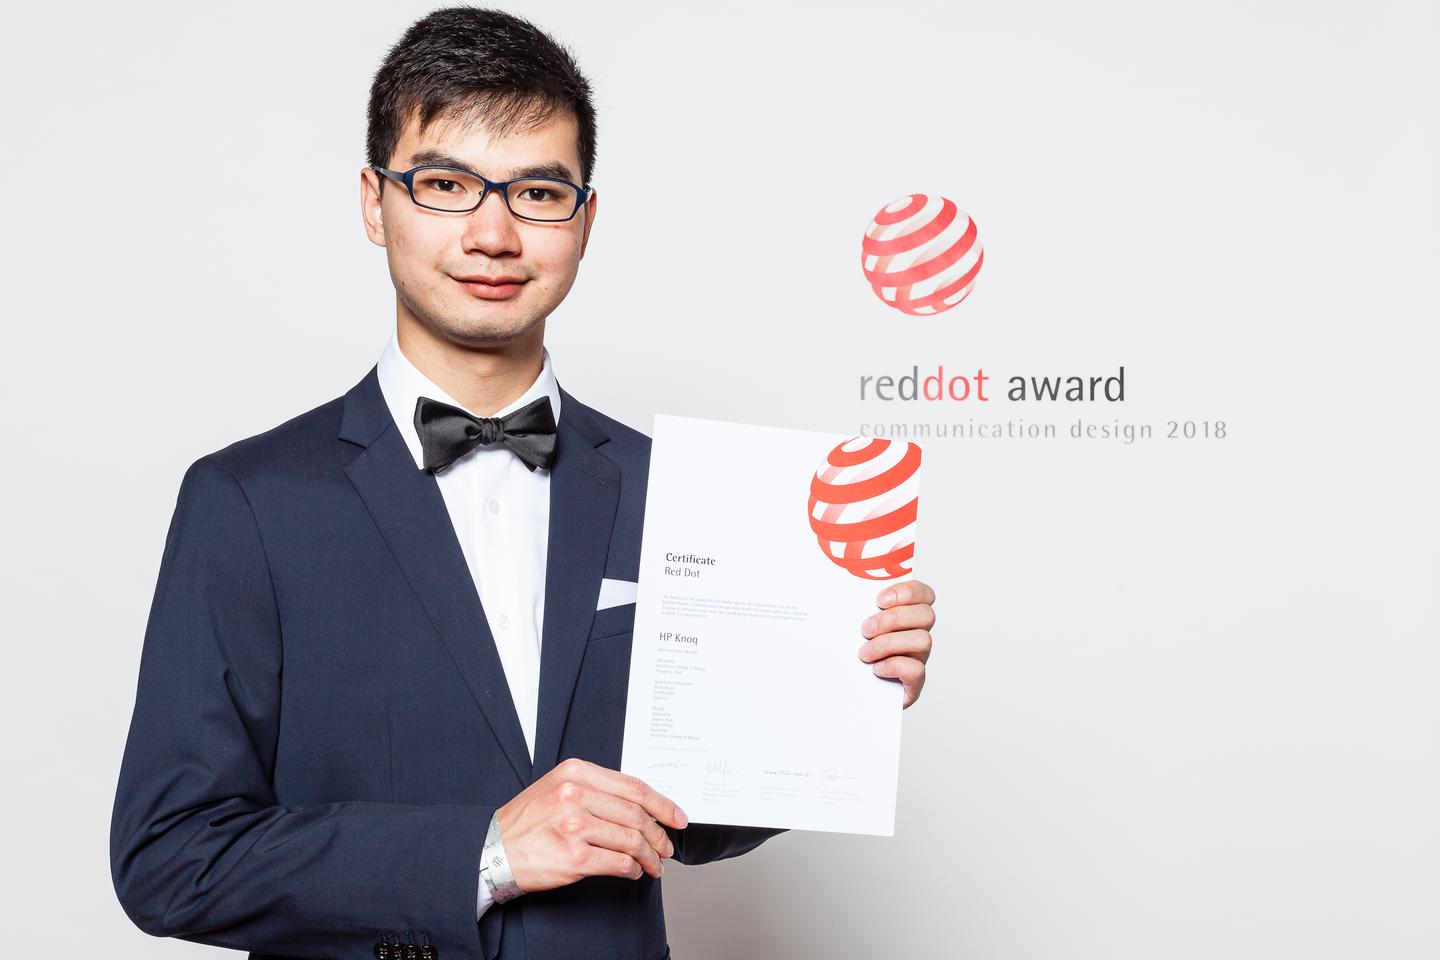 Picture of me recieving our Red Dot Award certificate